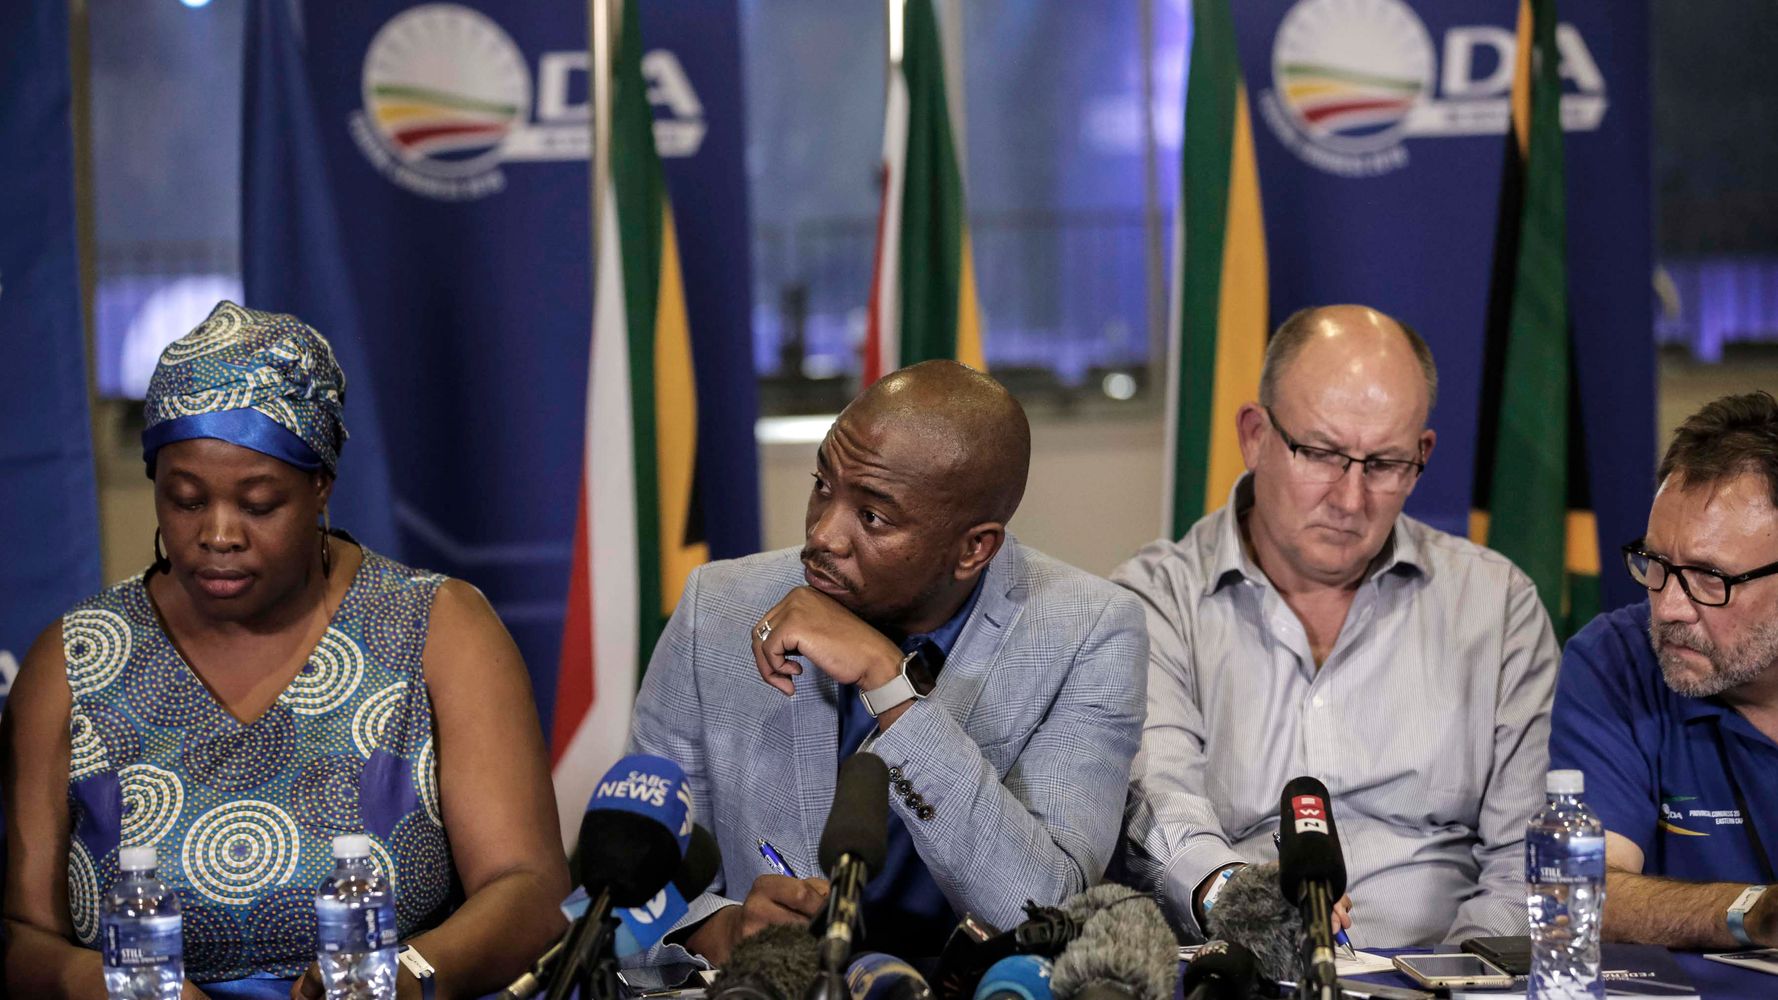 Da Mp Says Claims Of A Divide In The Party Is A Media Invention